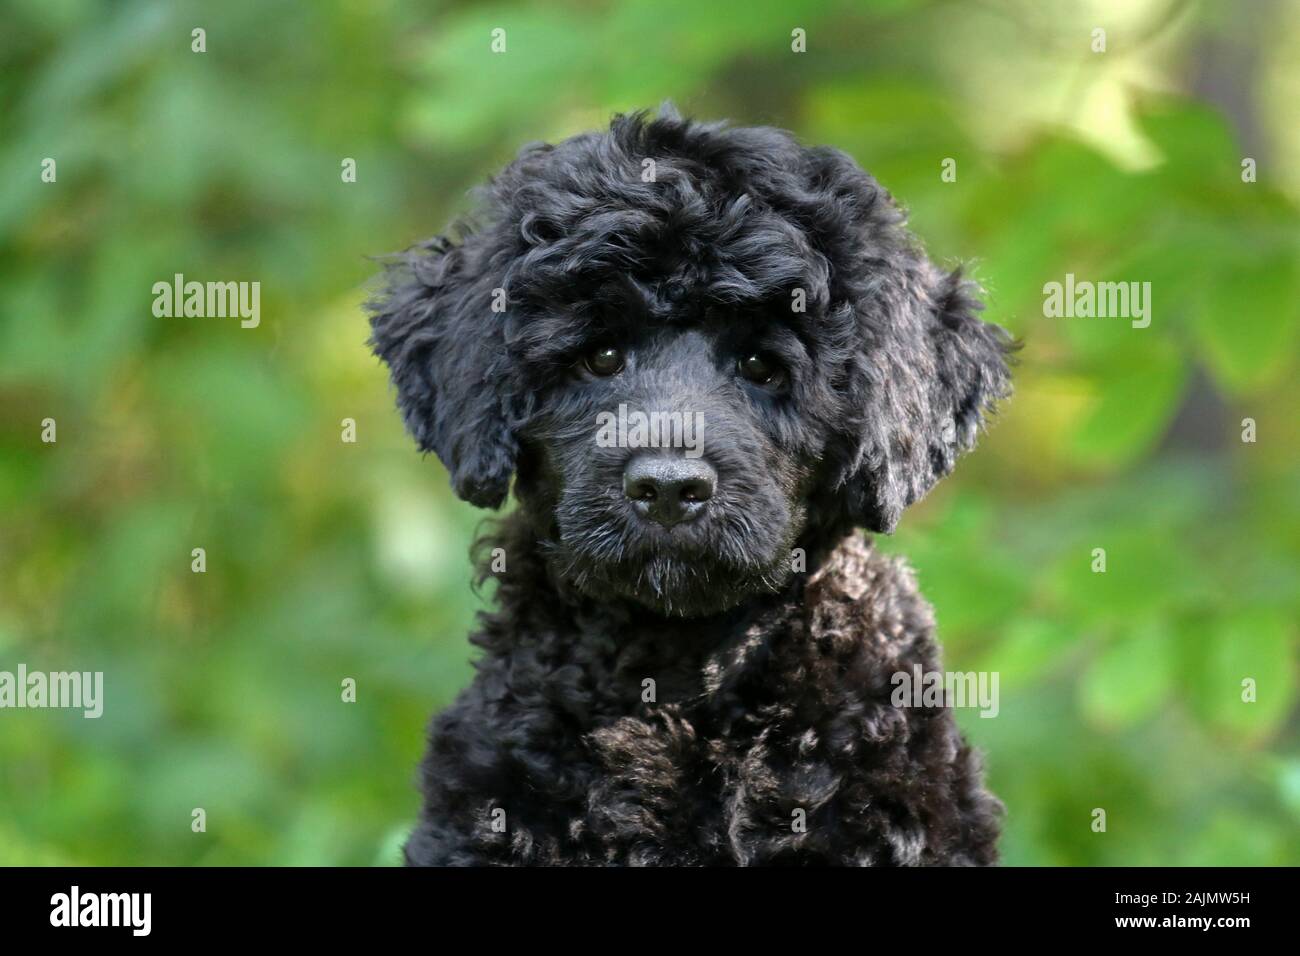 A Young Black Portuguese Water Dog With A Curly Coat Looking At The Camera Close Up On The Face Stock Photo Alamy